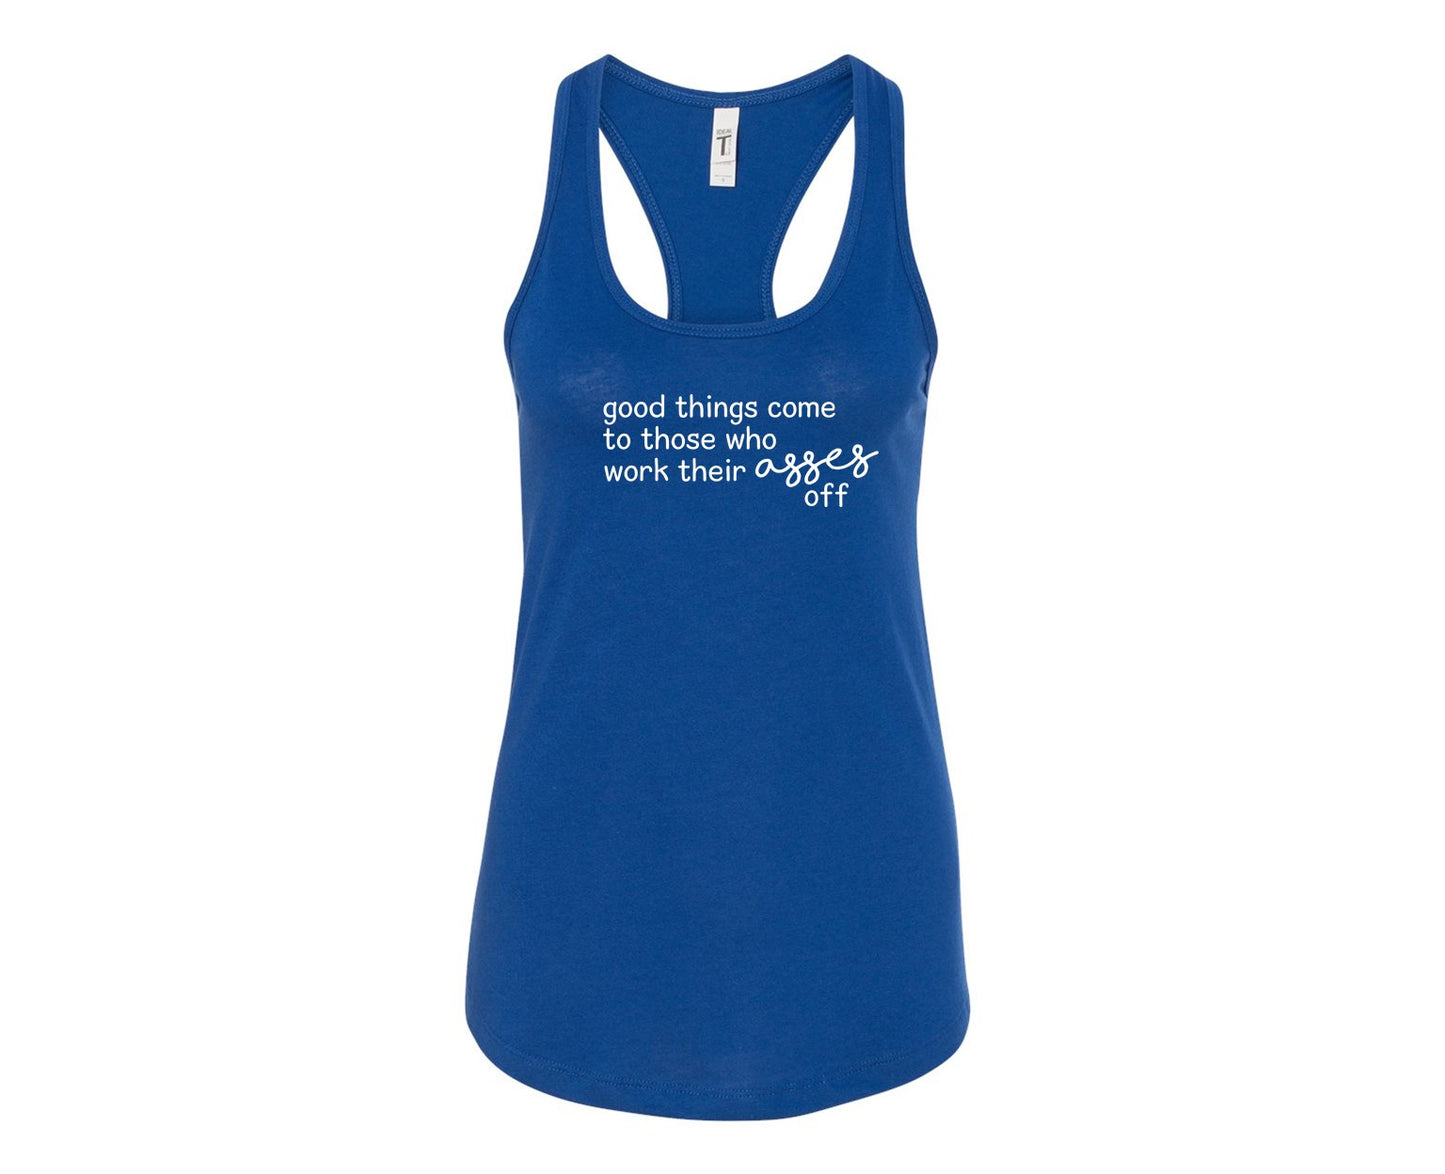 Good things come to those who work their asses off - Racerback Tank